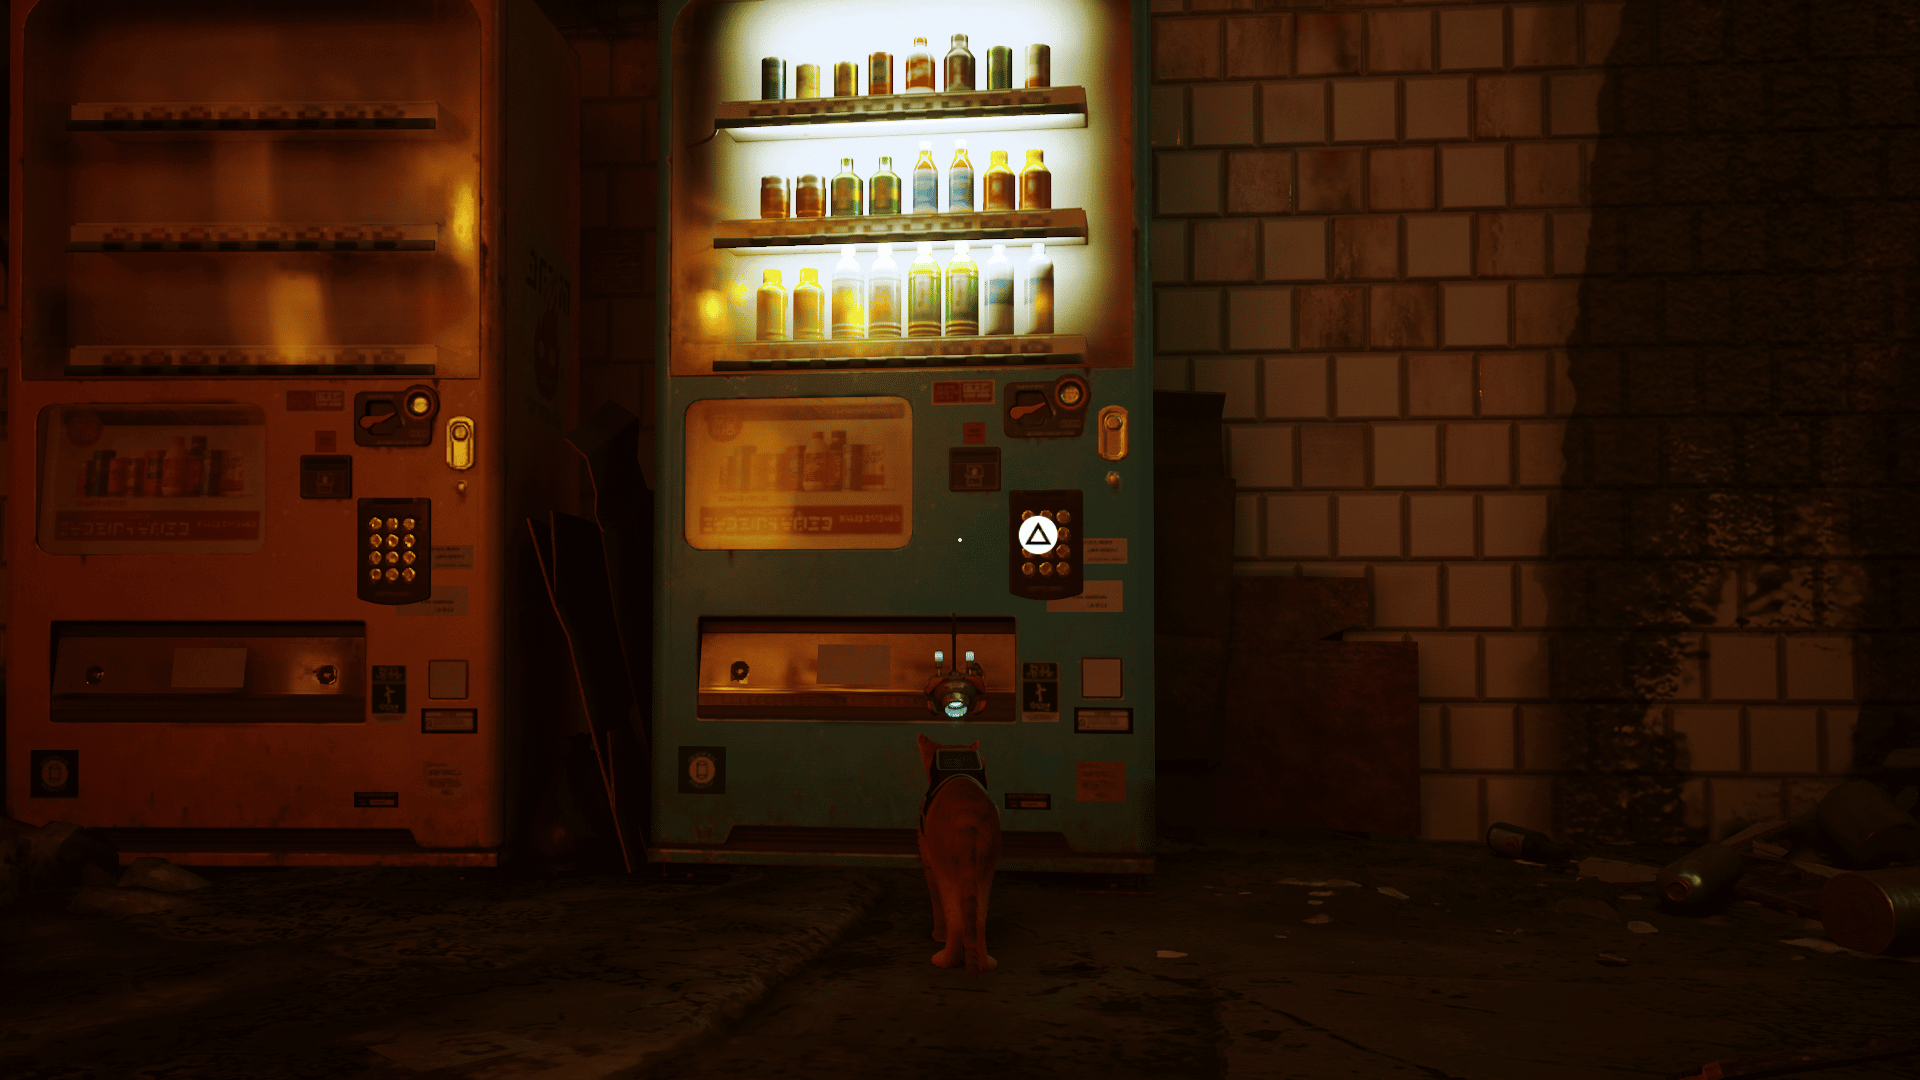 Screen of one of the Vending Machines in Stray